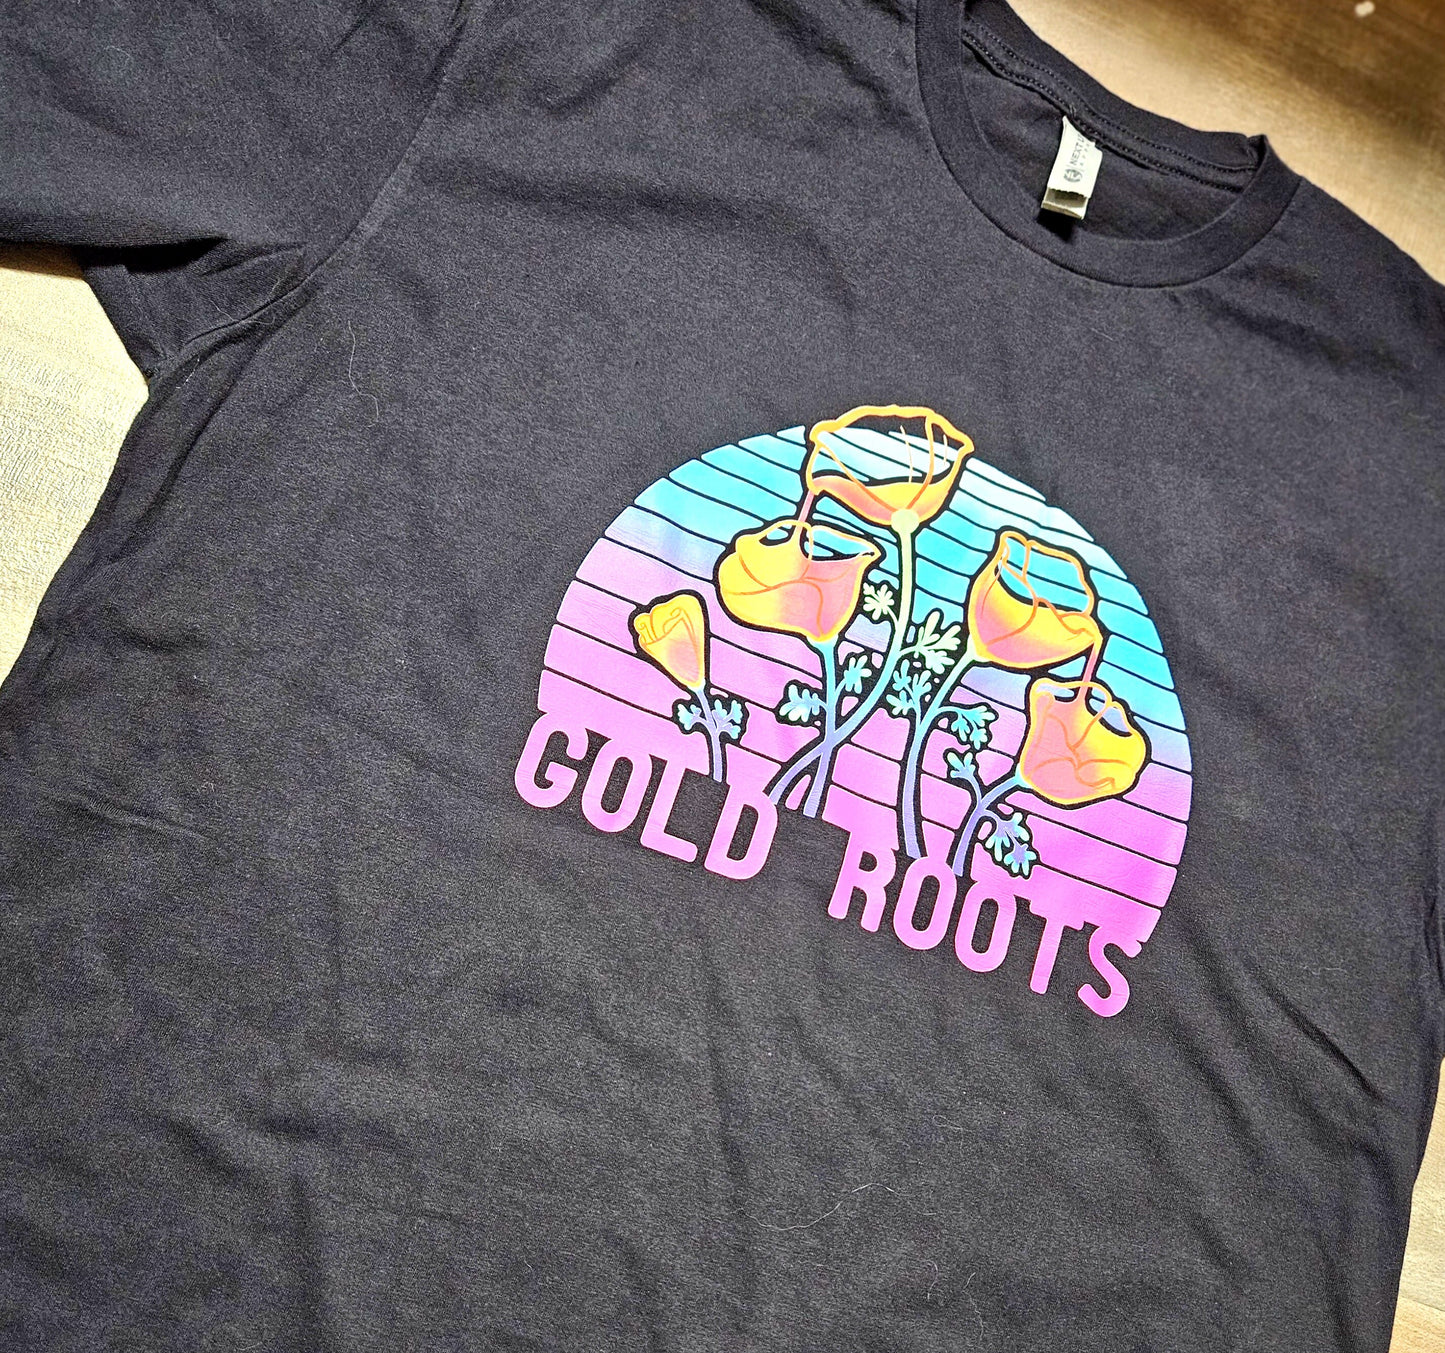 Gold Roots T-Shirt - California Poppies, Vaporwave, Vintage, Soft Tee, West Coast